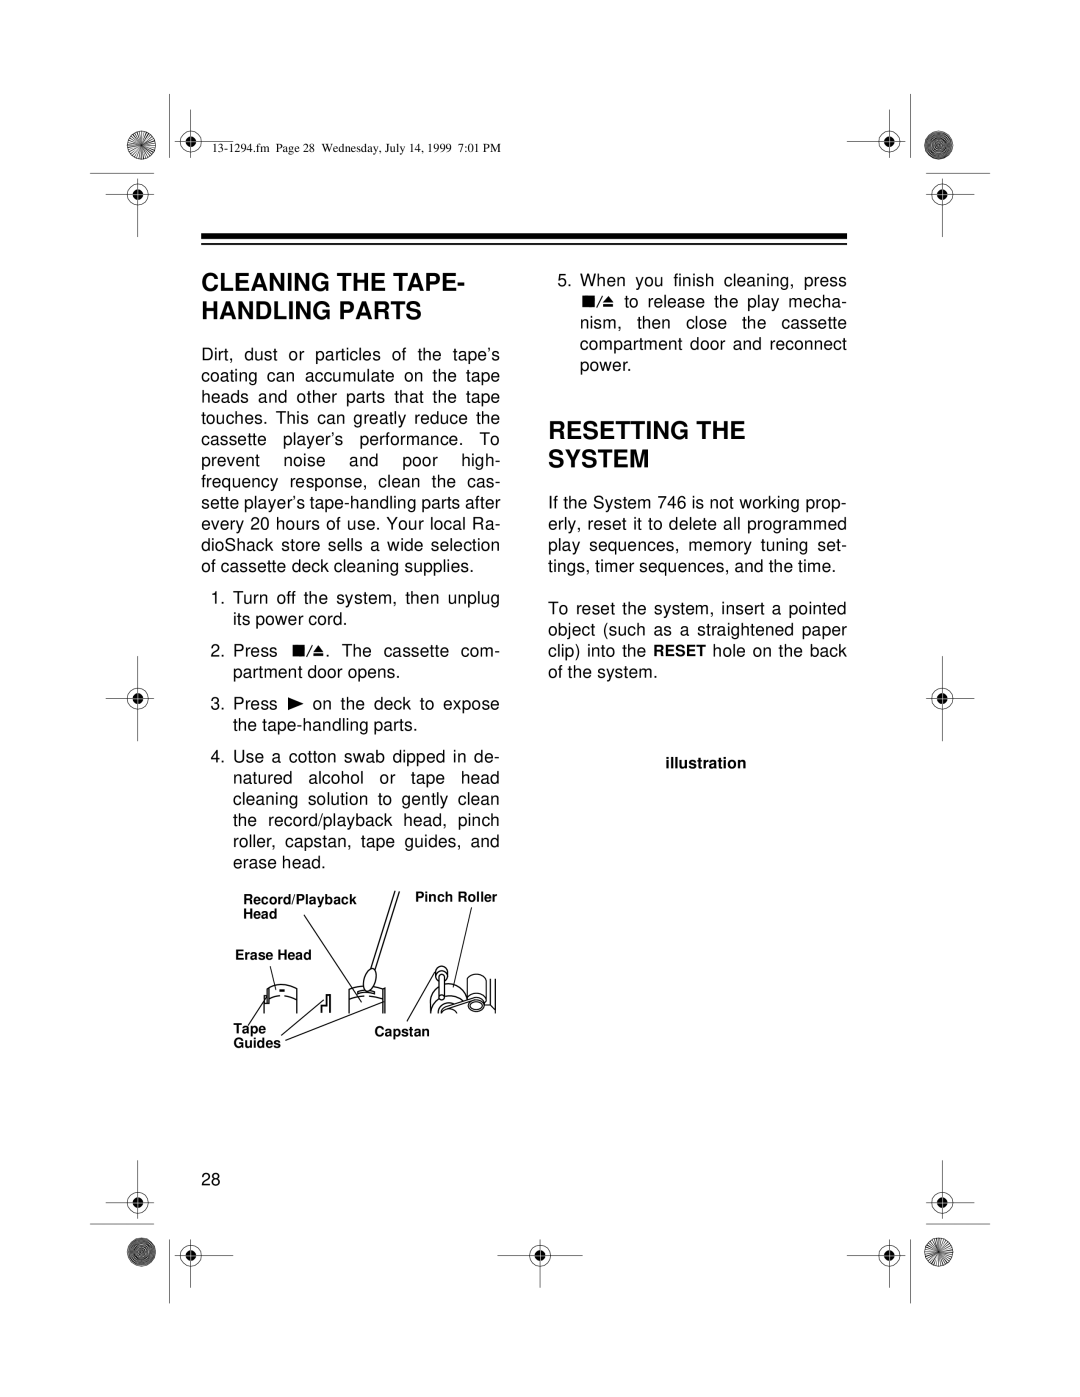 Optimus SYSTEM 746 owner manual Resetting The System, Cleaning The Tape- Handling Parts 